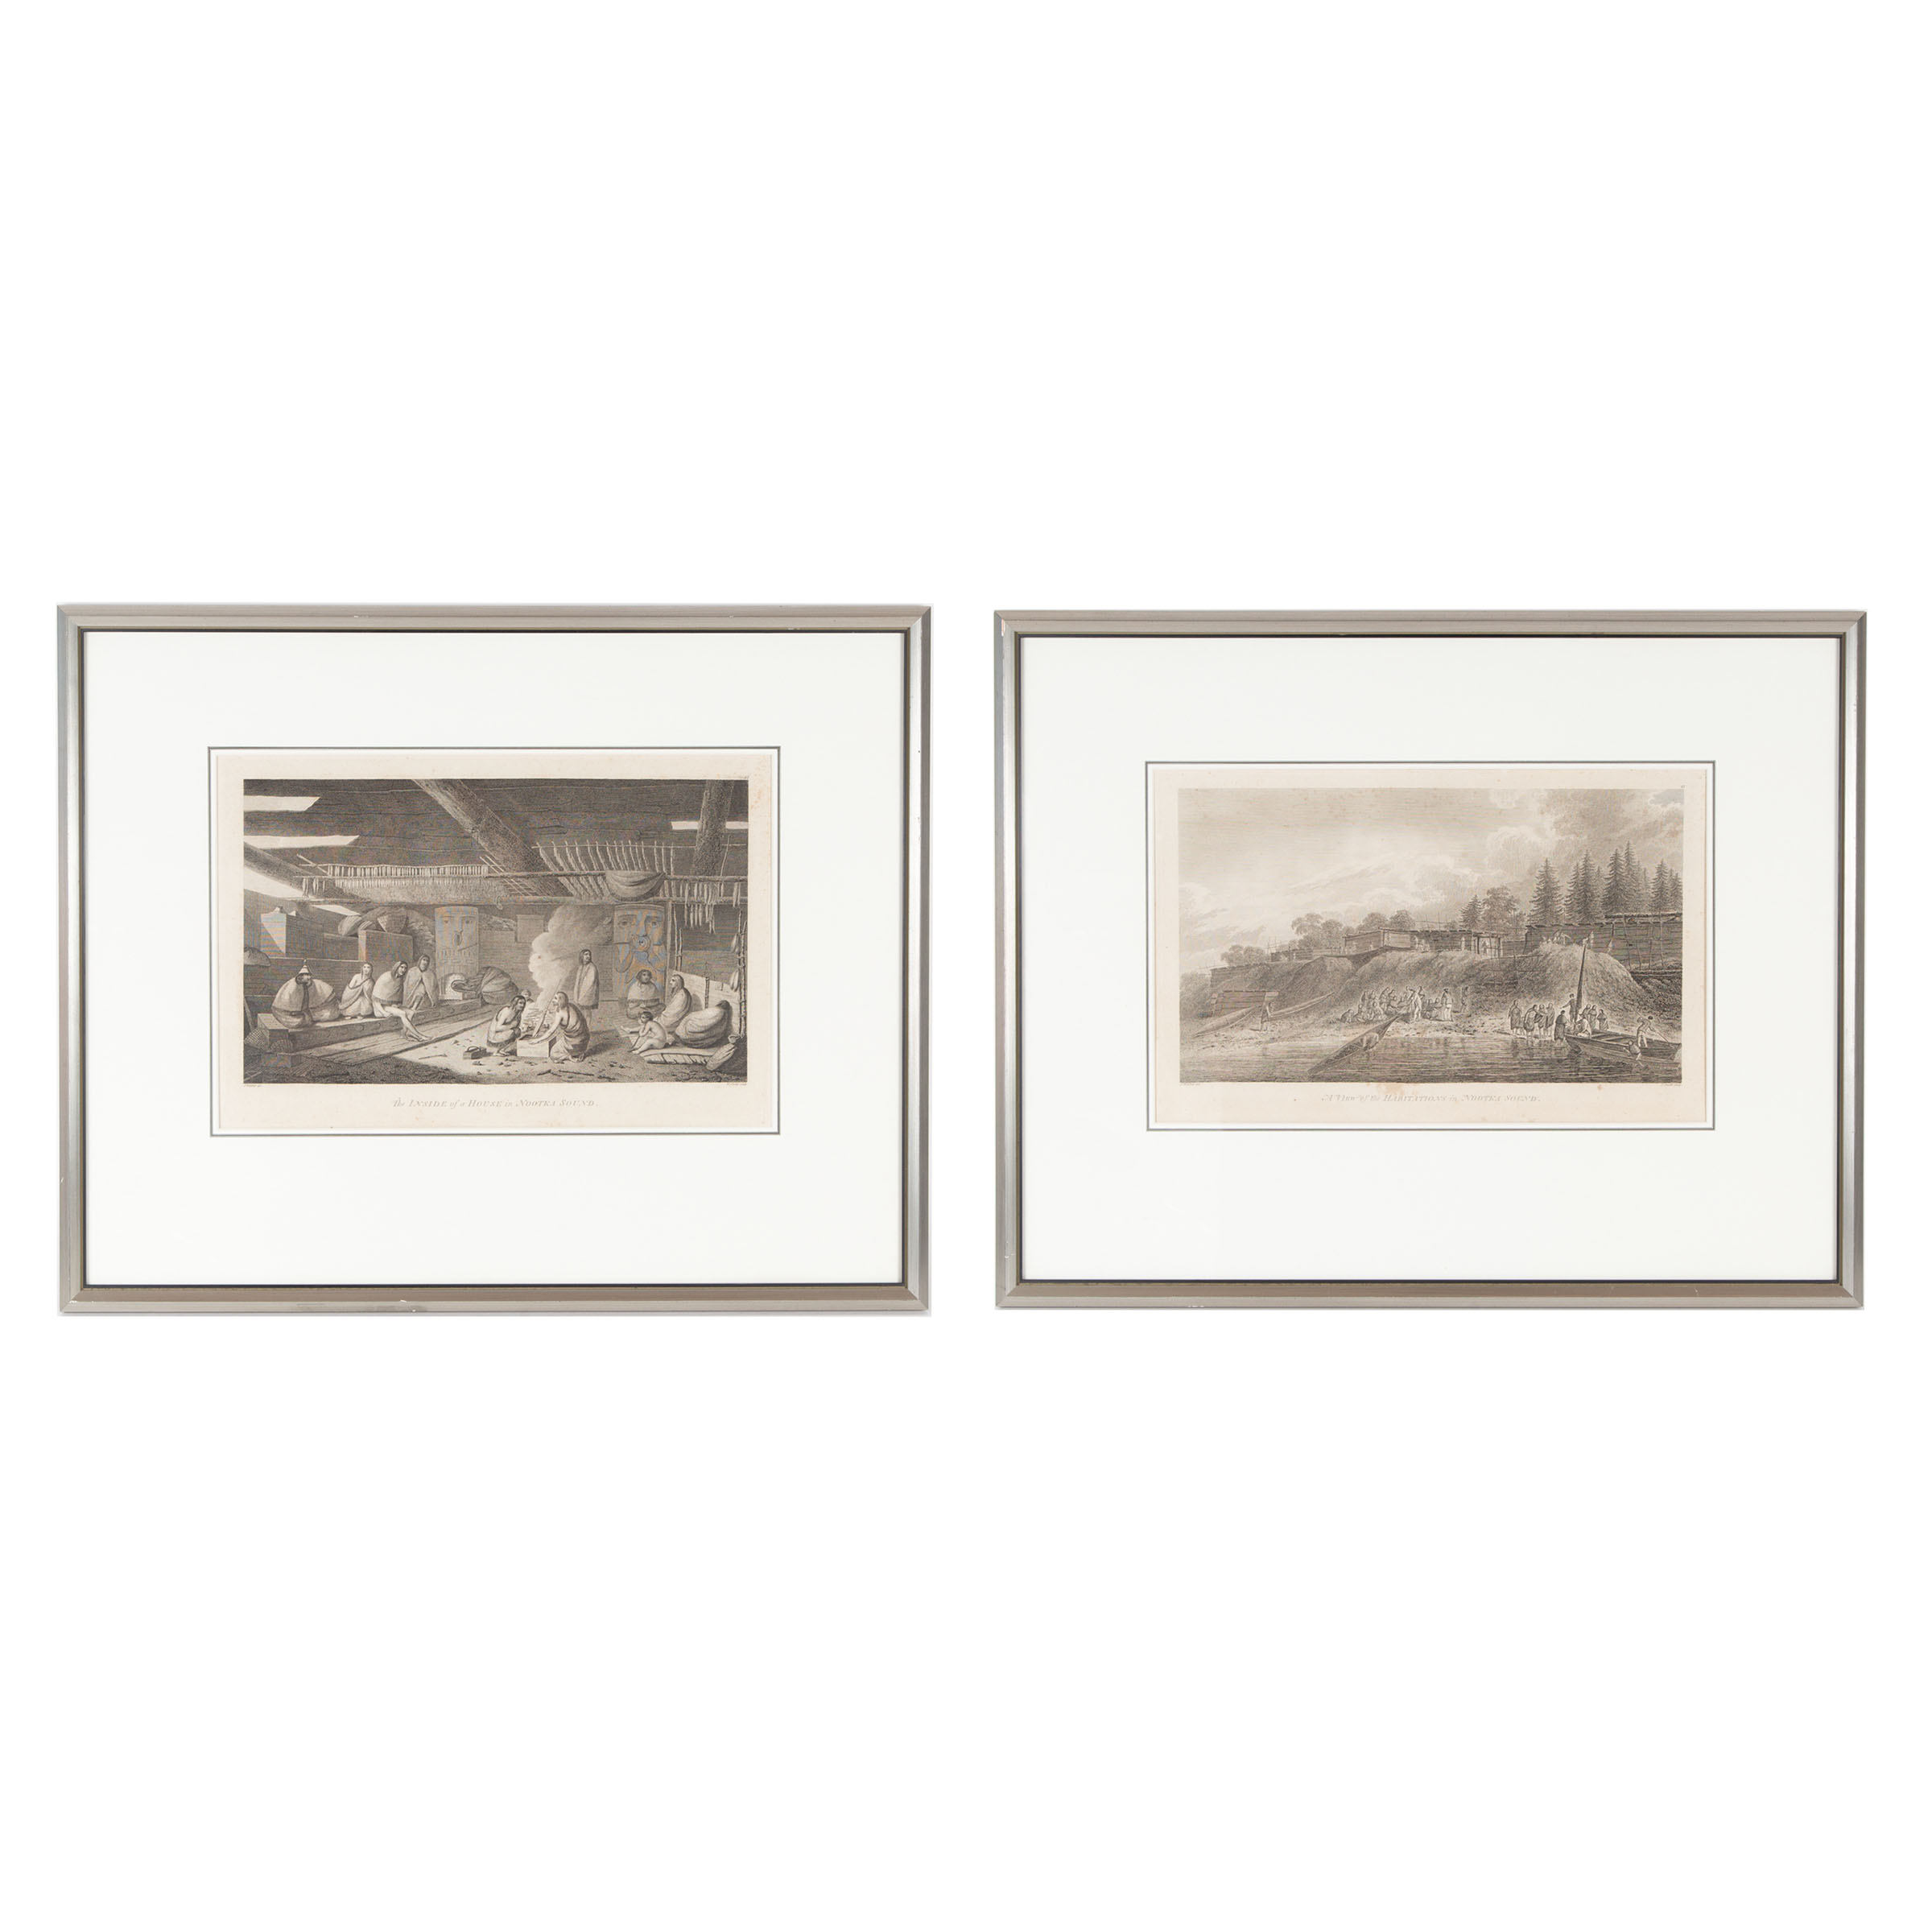 TWO ENGRAVINGS: "A VIEW OF THE HABITATIONS IN NOOTKA SOUND" AND "THE INSIDE OF A HOUSE IN NOOTKA SOUND"